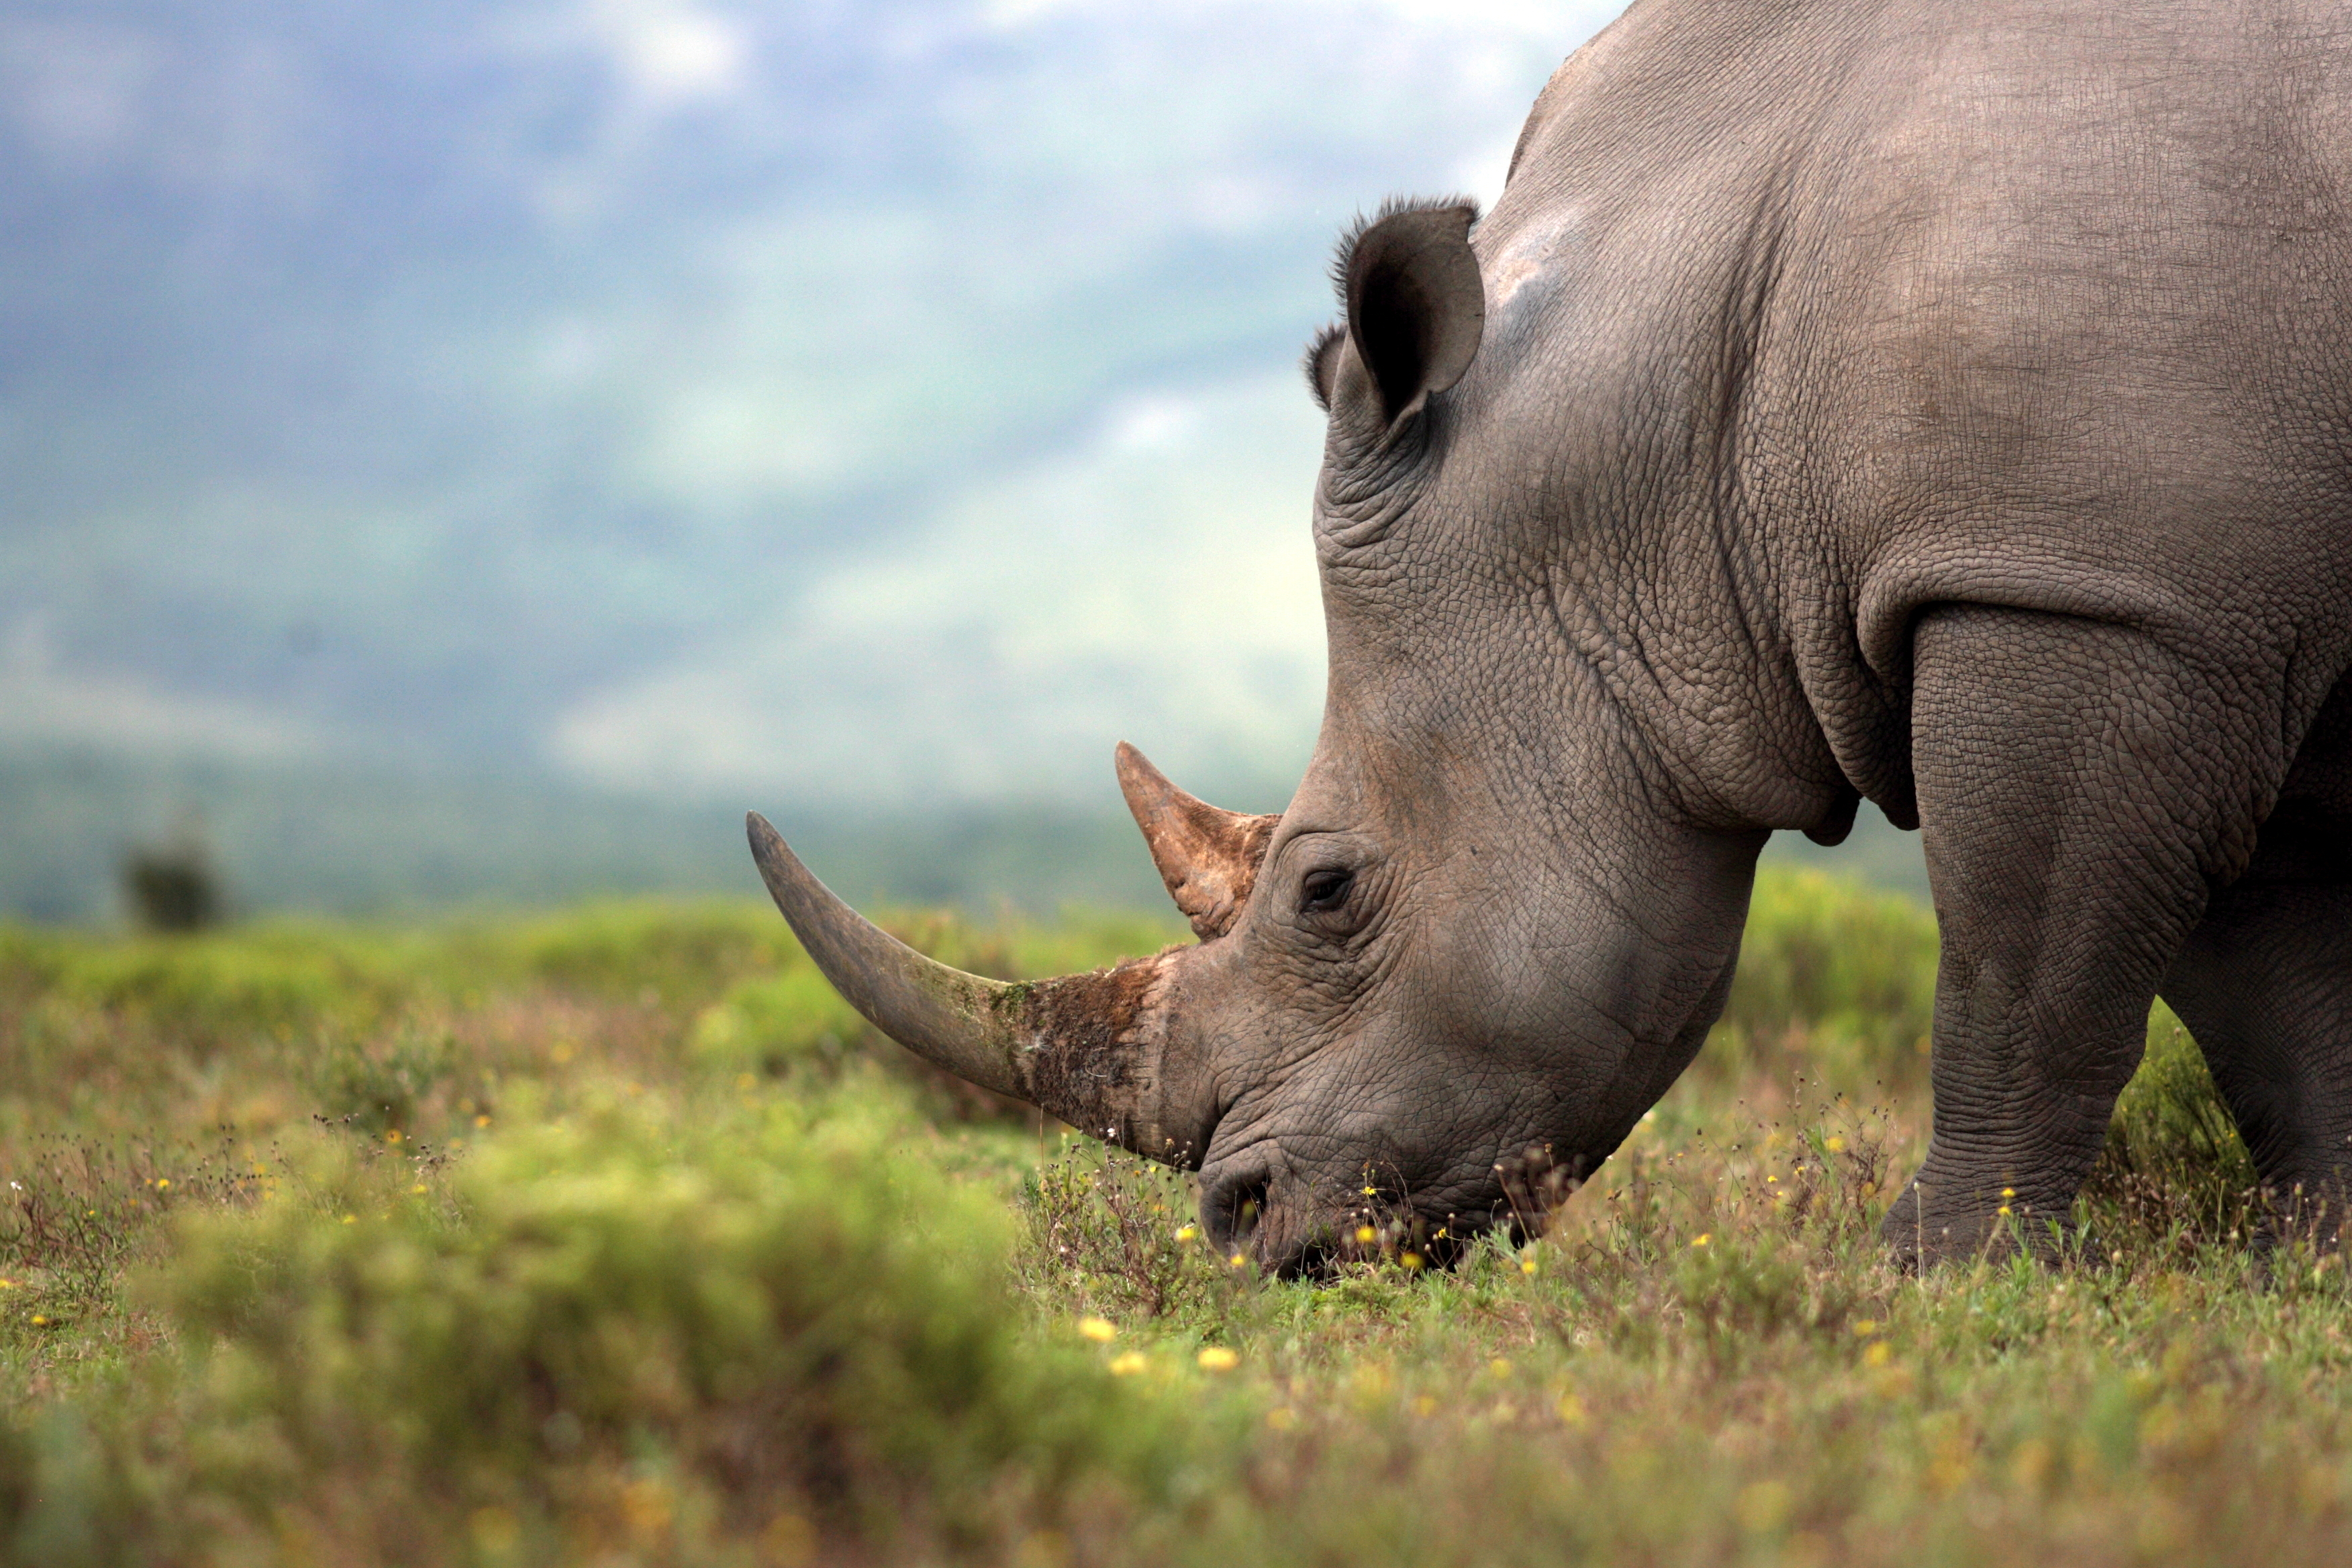 Poachers could soon face the death penalty in Kenya